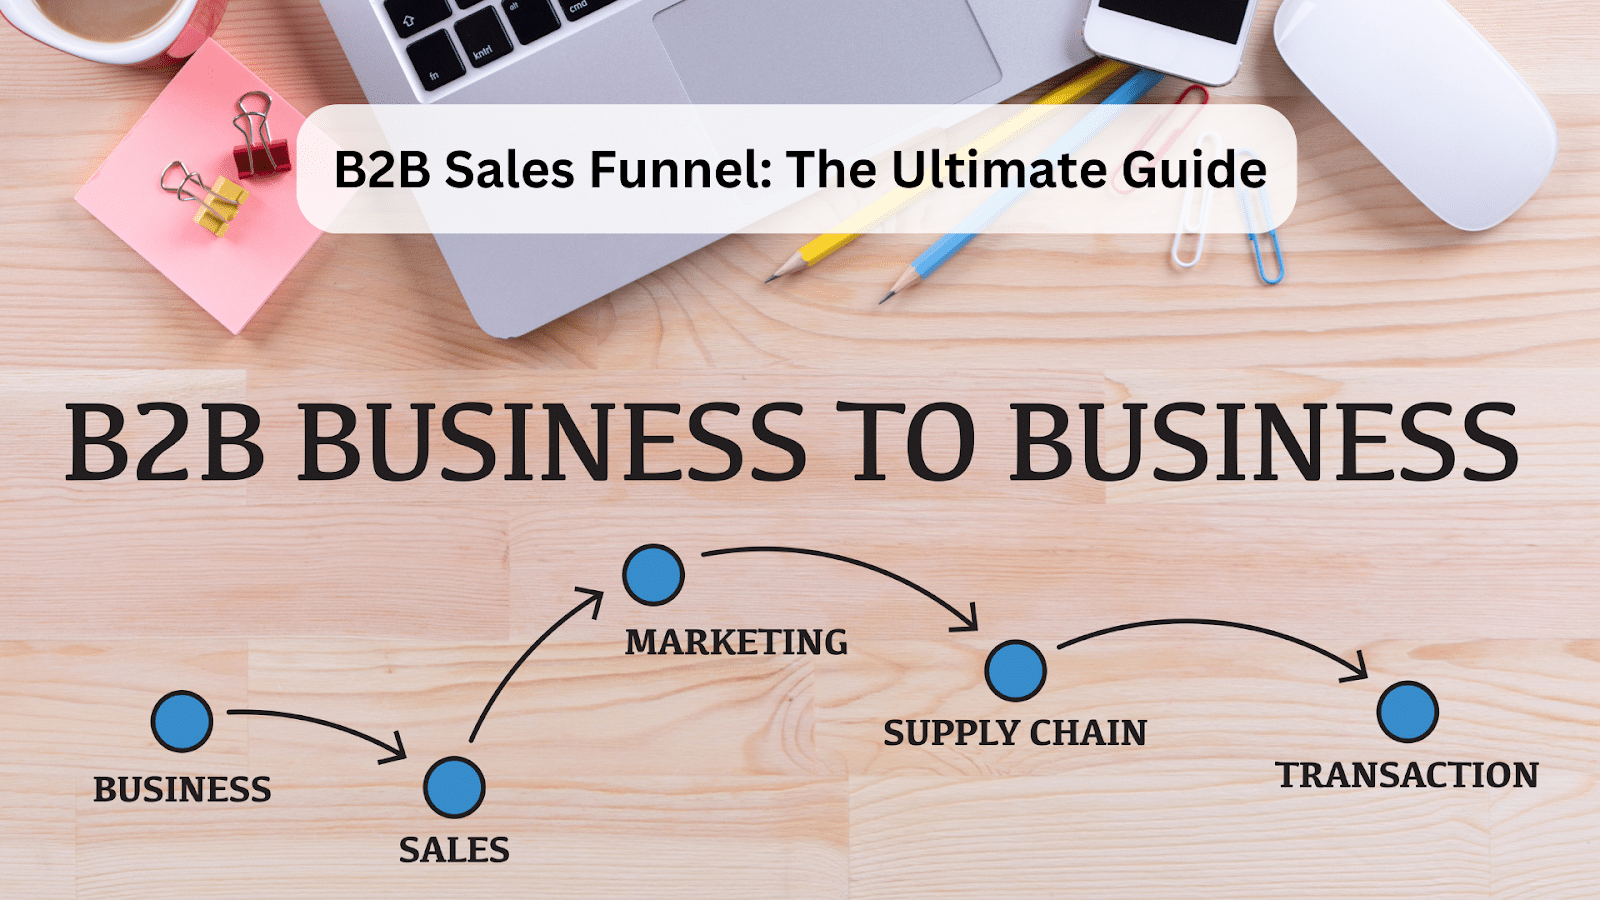 B2B Sales Funnel: The Ultimate Guide